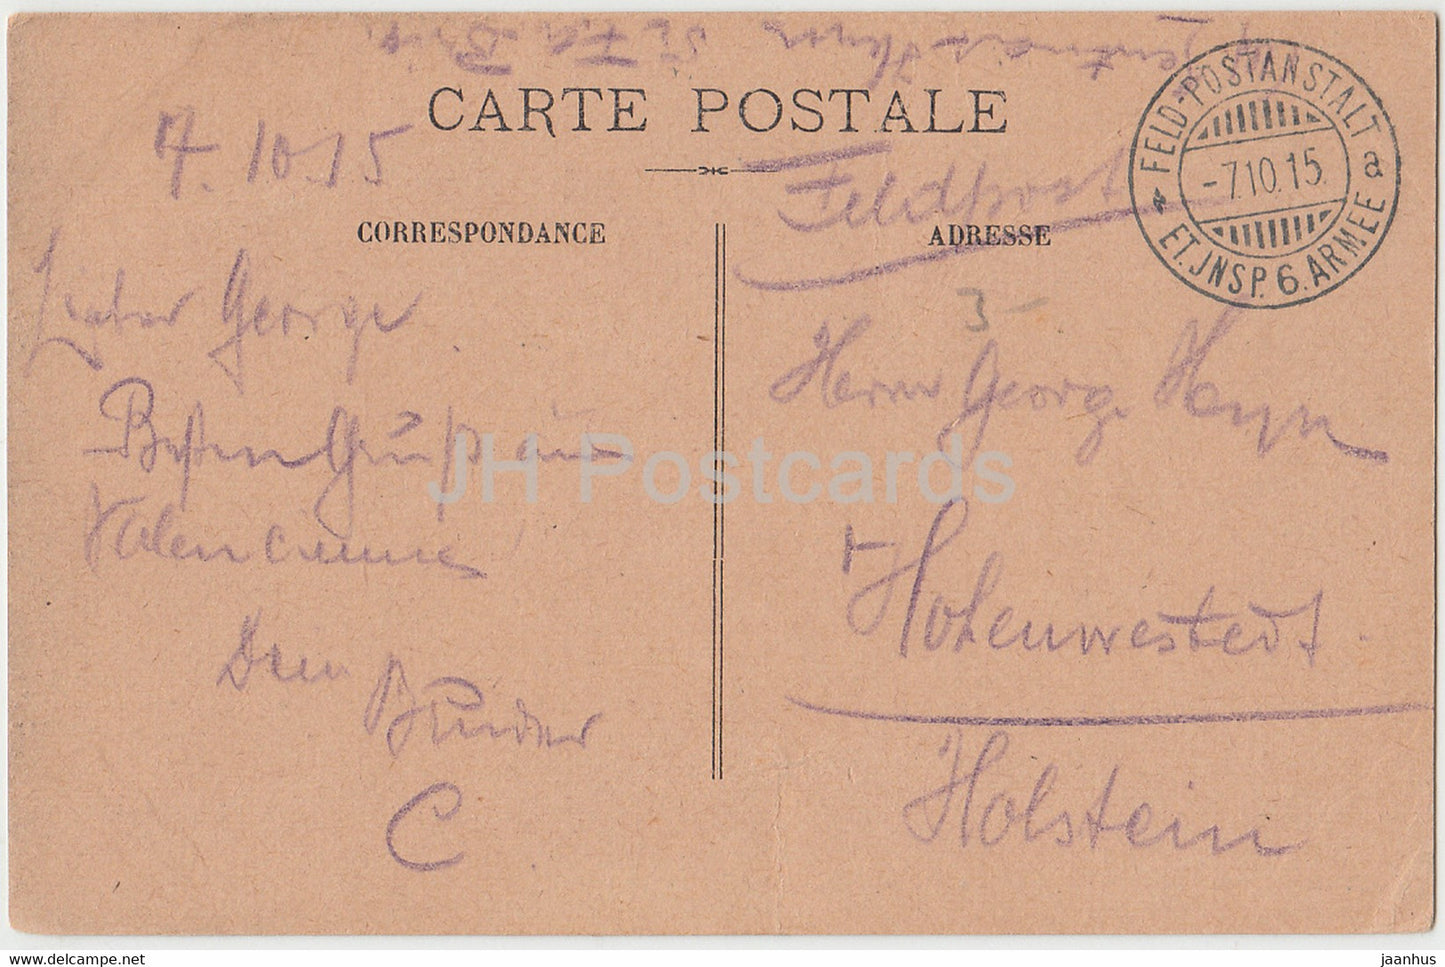 Valenciennes - Eglise Notre Dame - church - 6 Armee - Feldpost - old postcard - 1915 - France - used